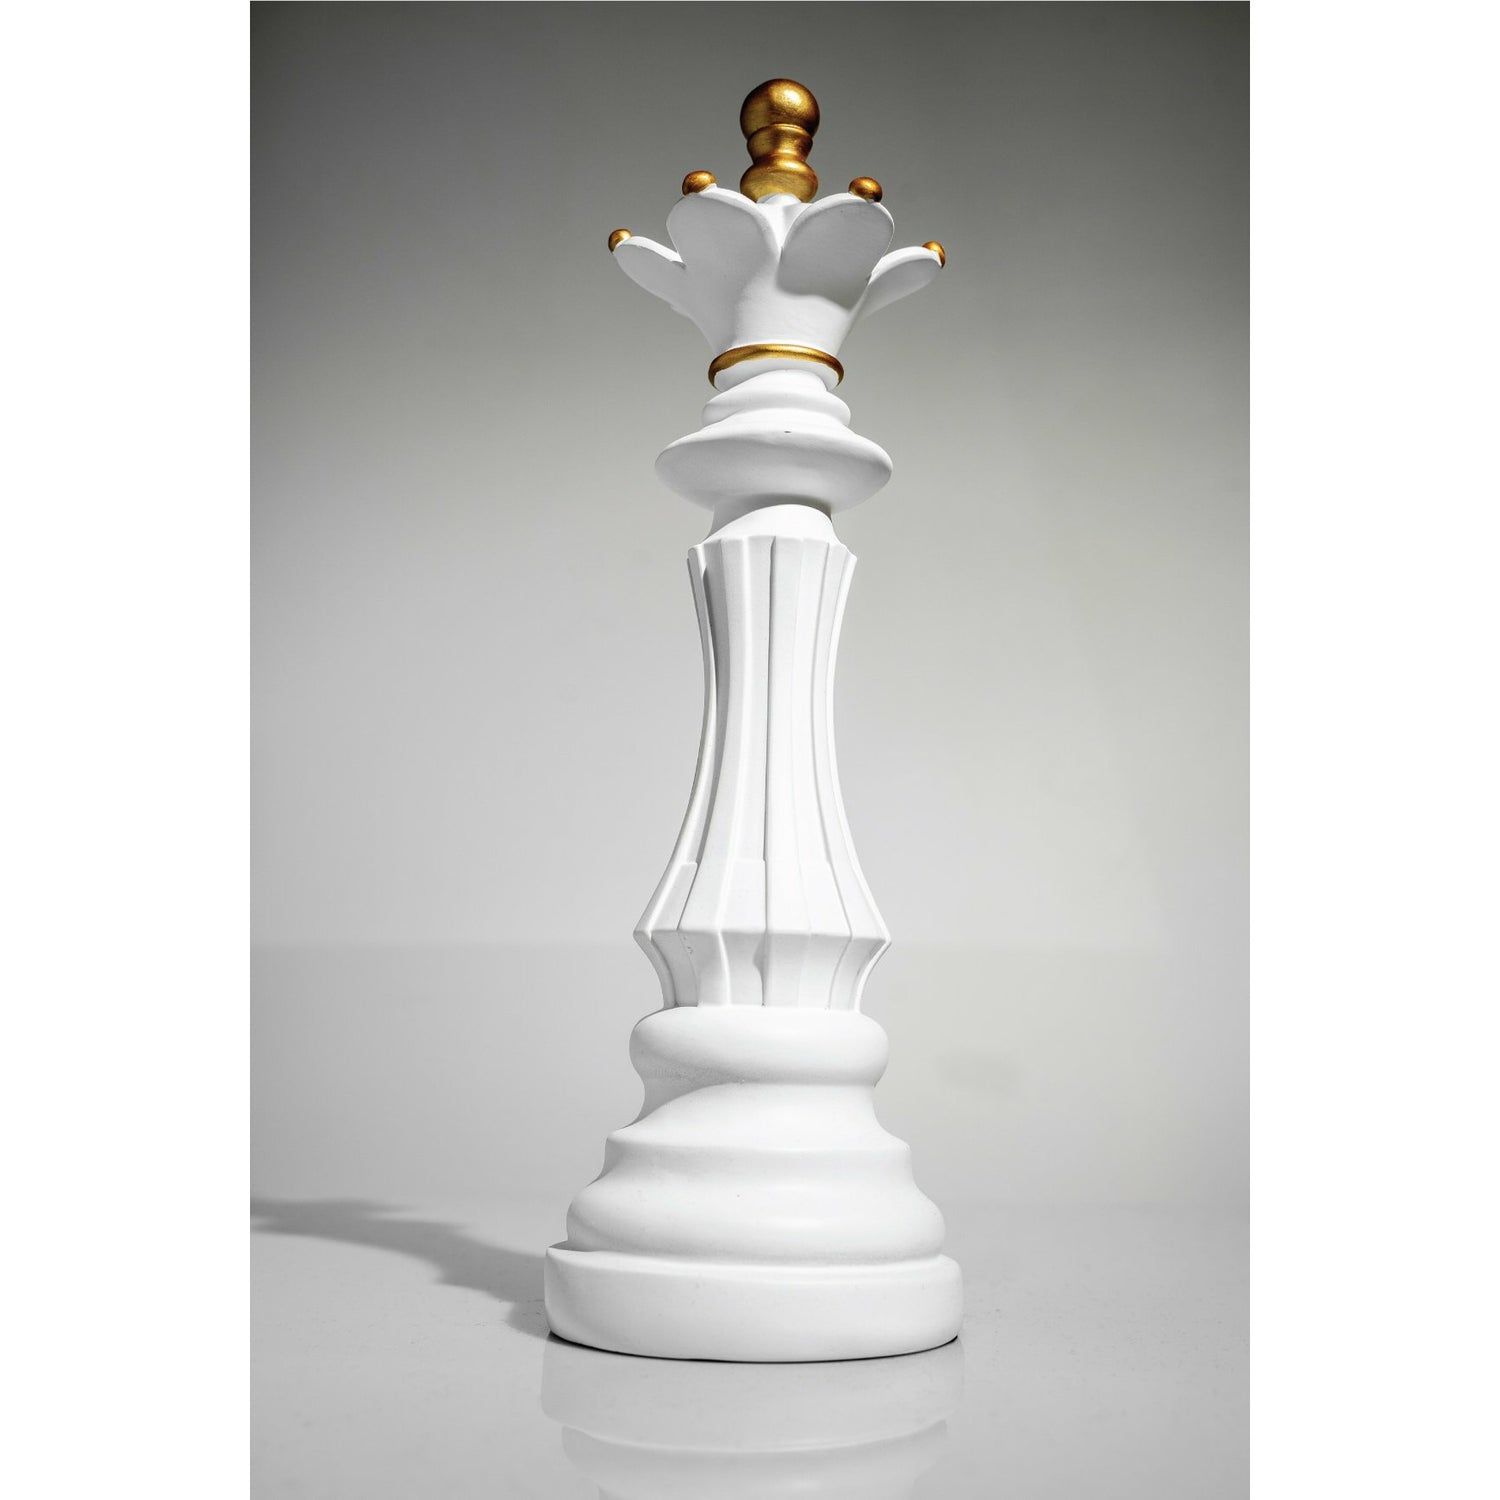 White & Gold Queen Chess Piece - Our White & Gold Chess Pieces are the perfect addition to any space. Made-to-order pieces are also available.